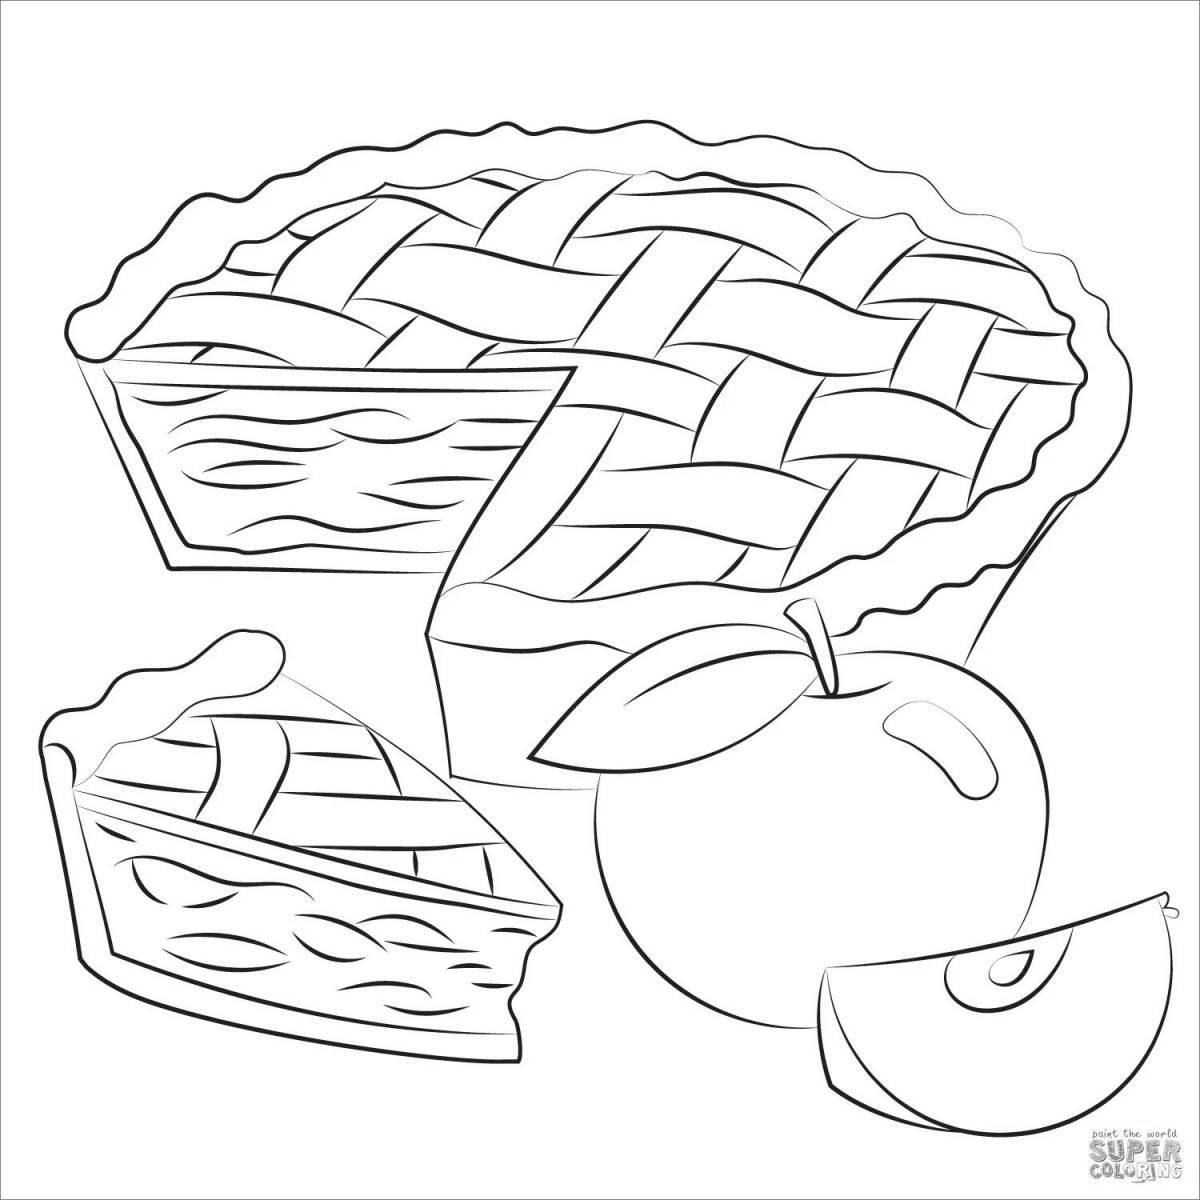 Playful pie coloring page for kids